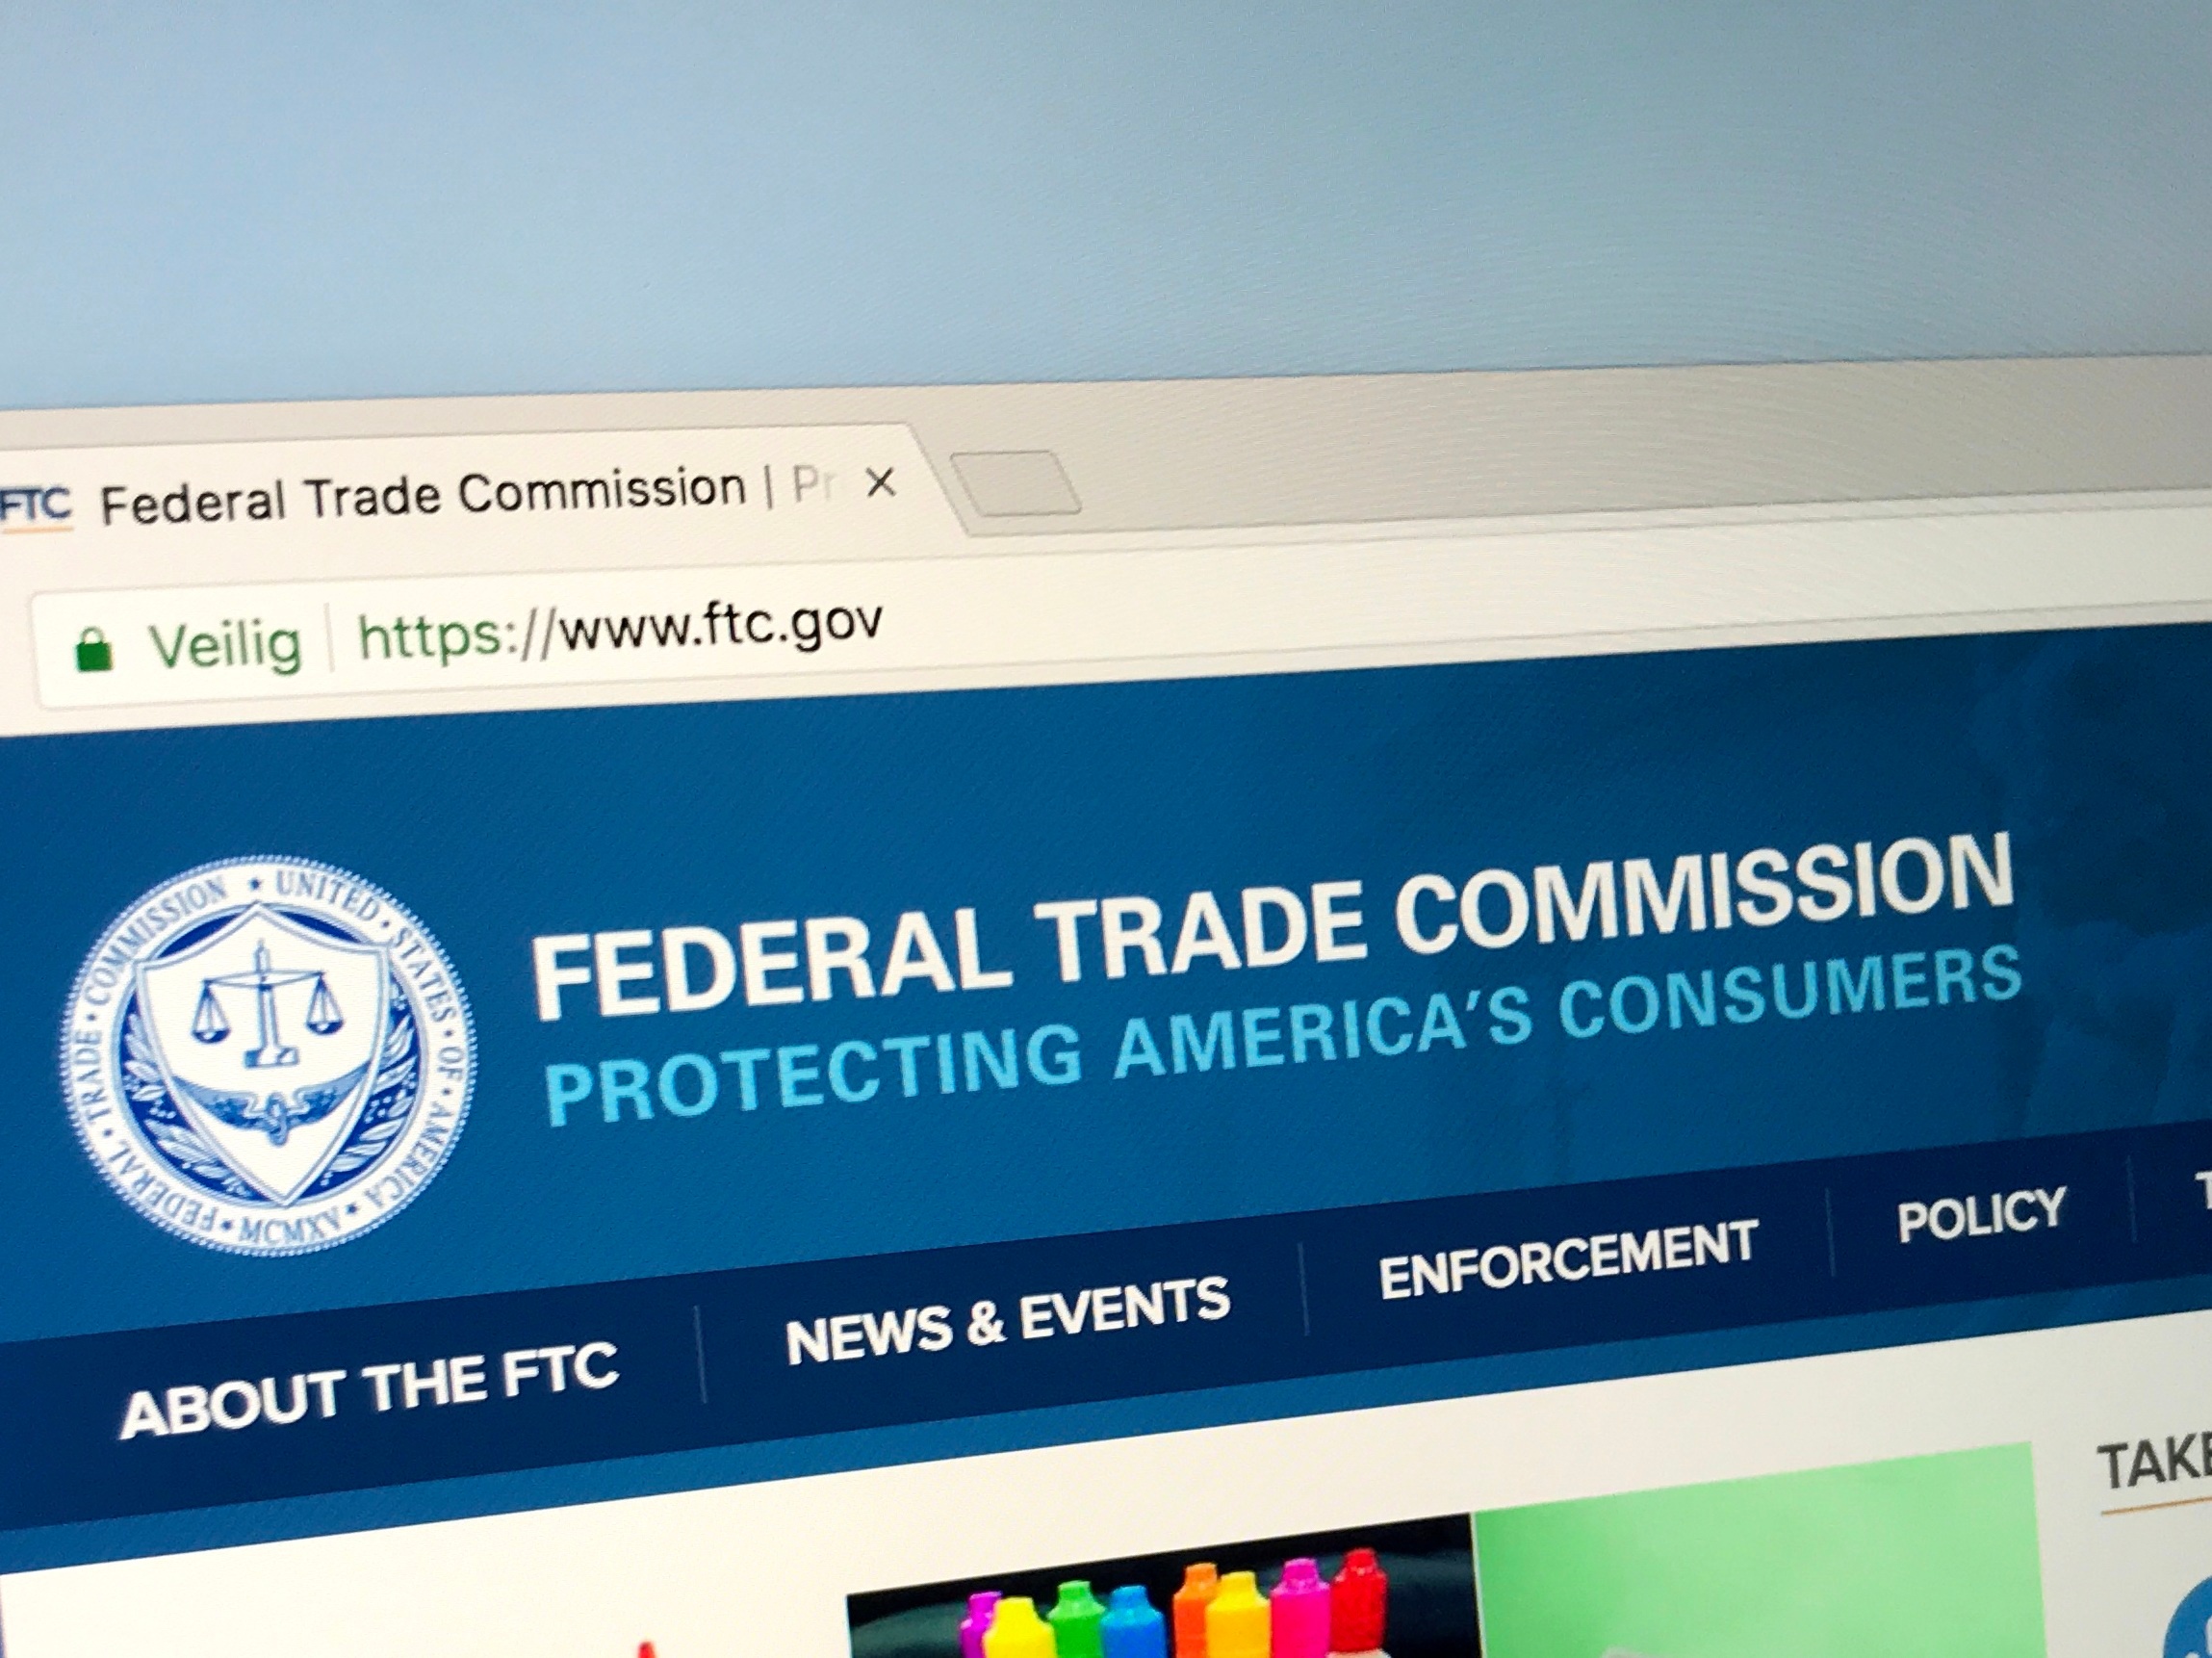 A screenshot of the FTC website and how it supports personal finance education.